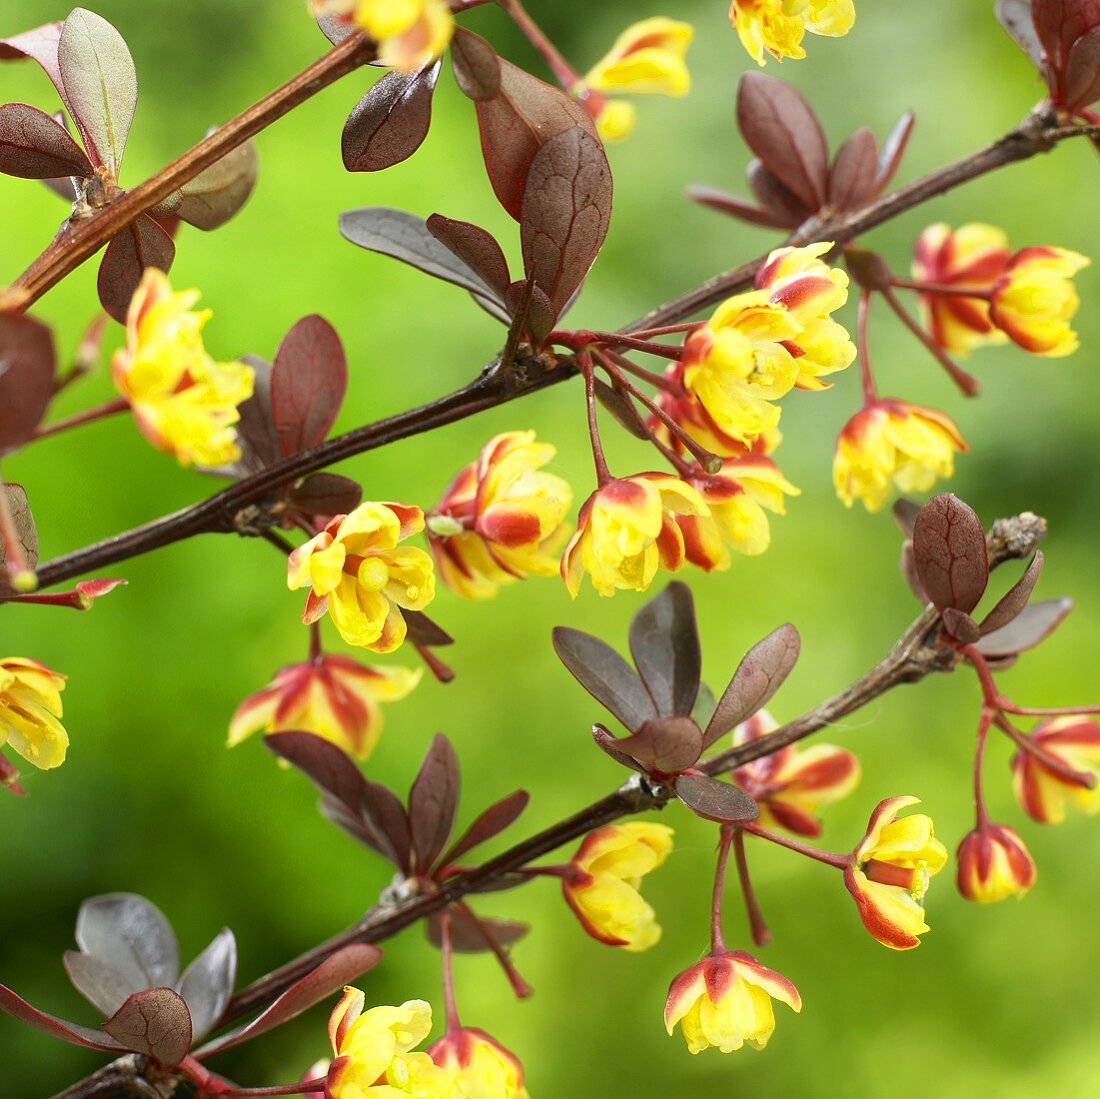 Japanese barberry with flowers (Berberis thunbergii 'Red Chief')